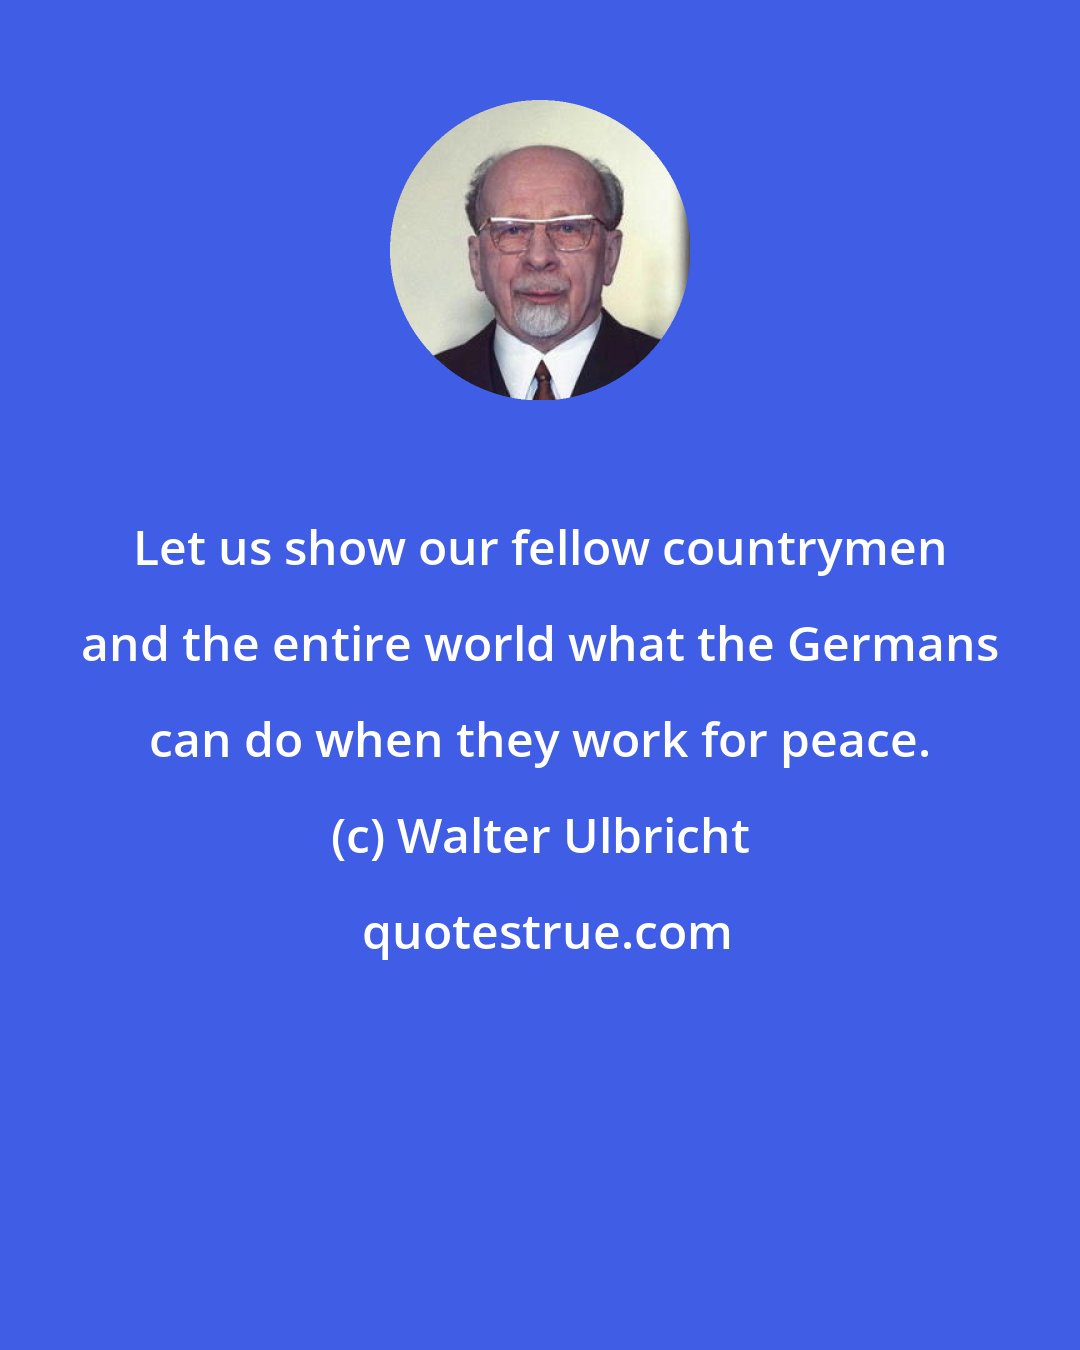 Walter Ulbricht: Let us show our fellow countrymen and the entire world what the Germans can do when they work for peace.